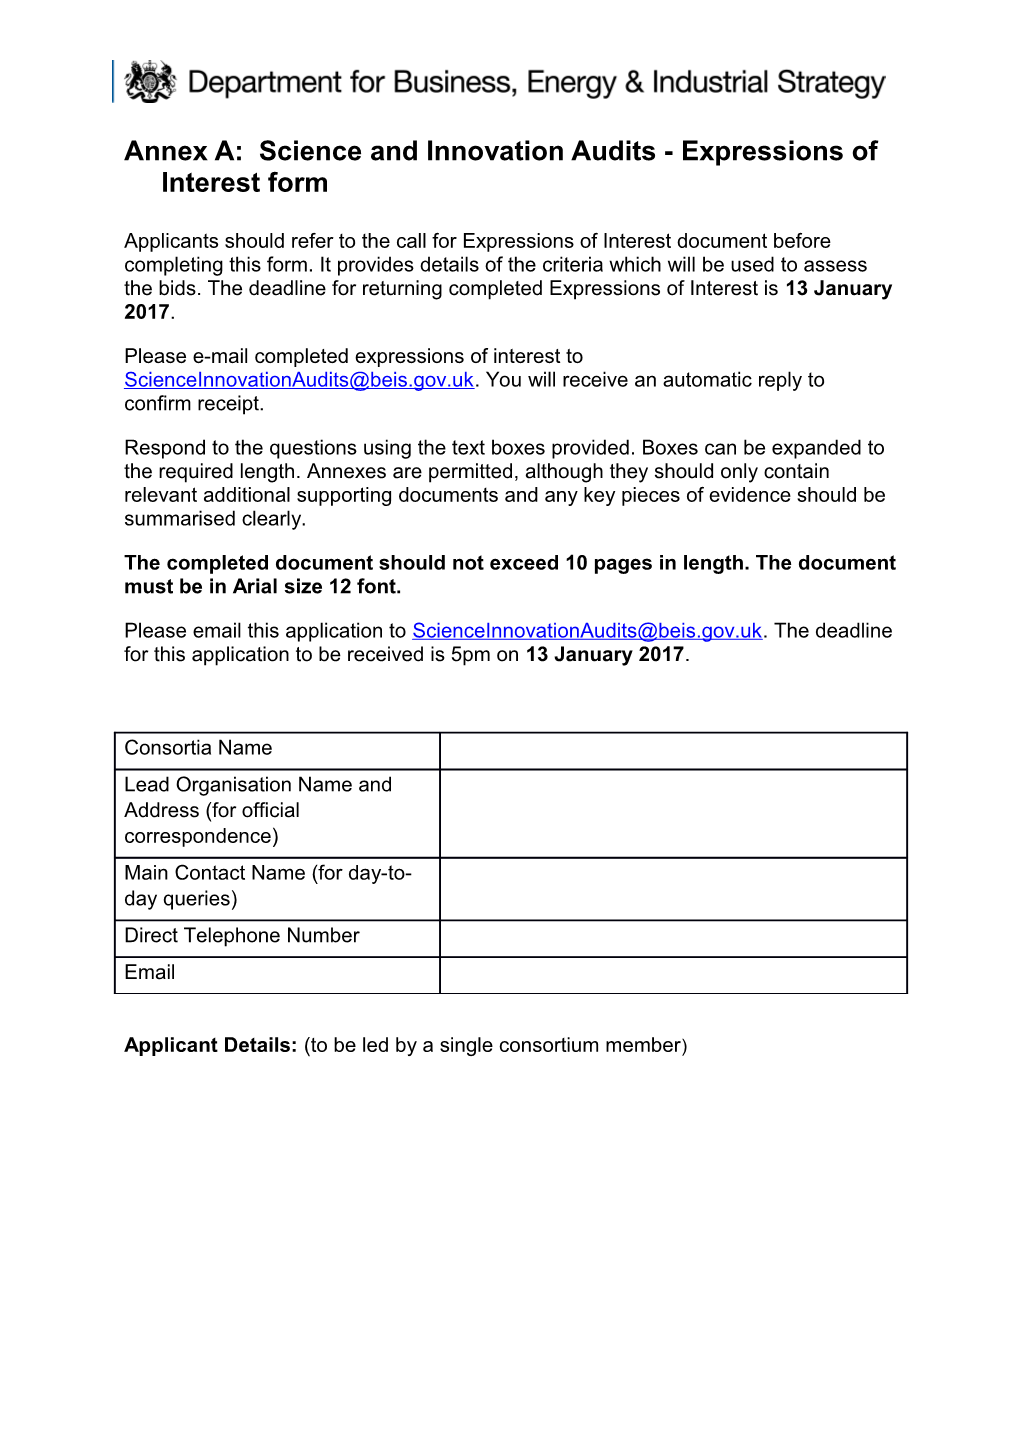 Annex A: Science and Innovation Audits - Expressions of Interest Form